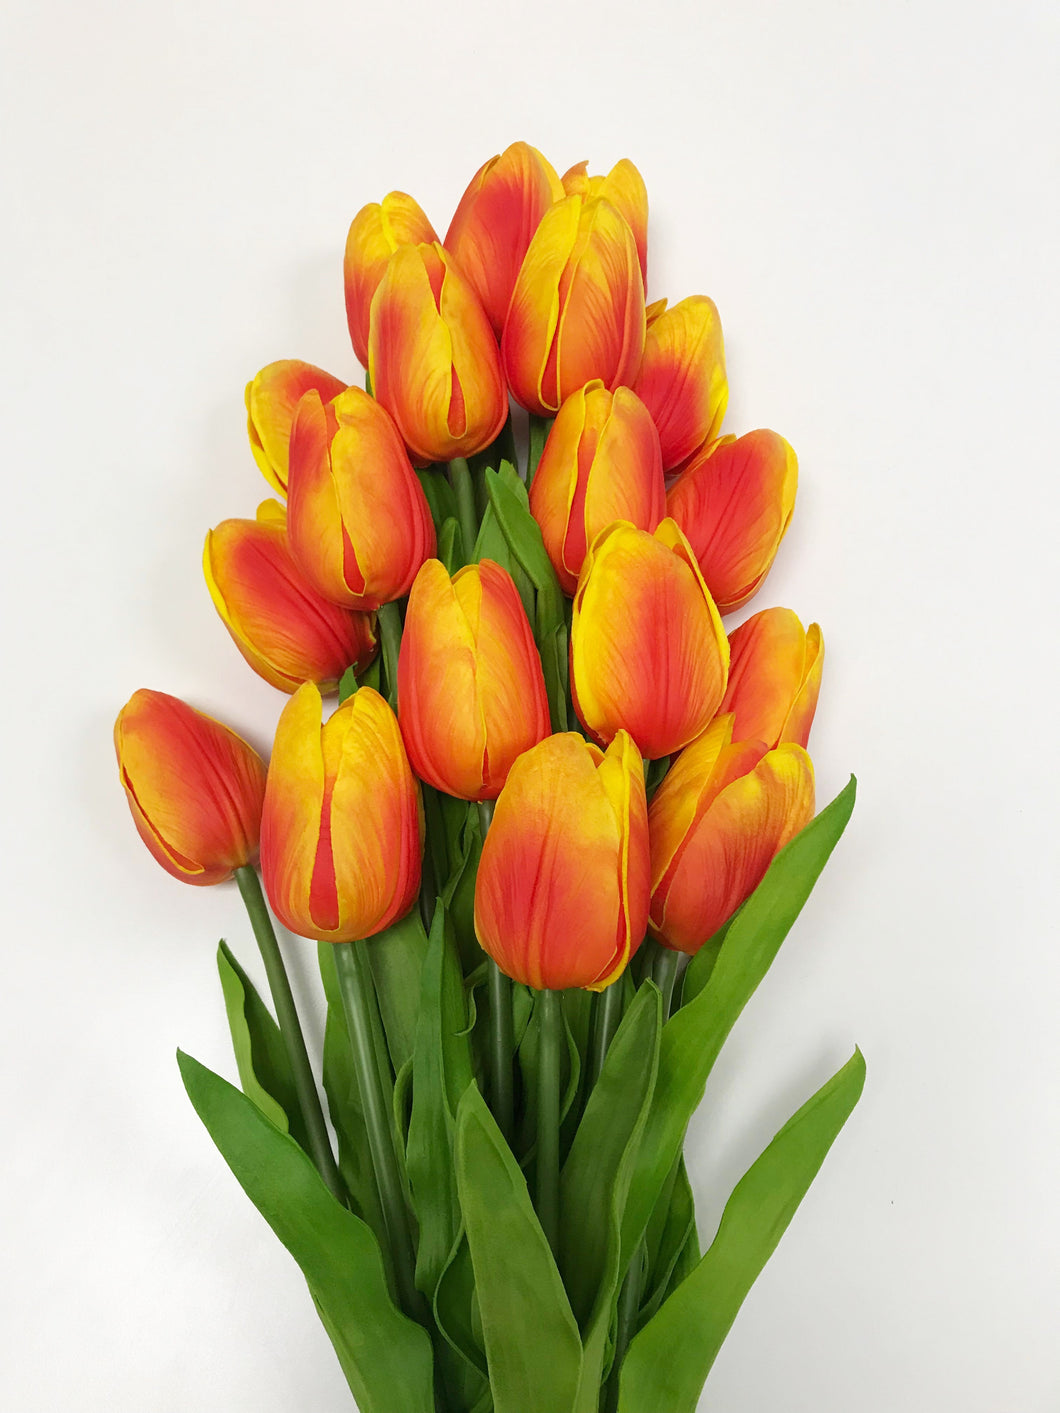 Tulip Flower Artificial Real Touch With Stem Made From Premium PU Leather in Orange Color